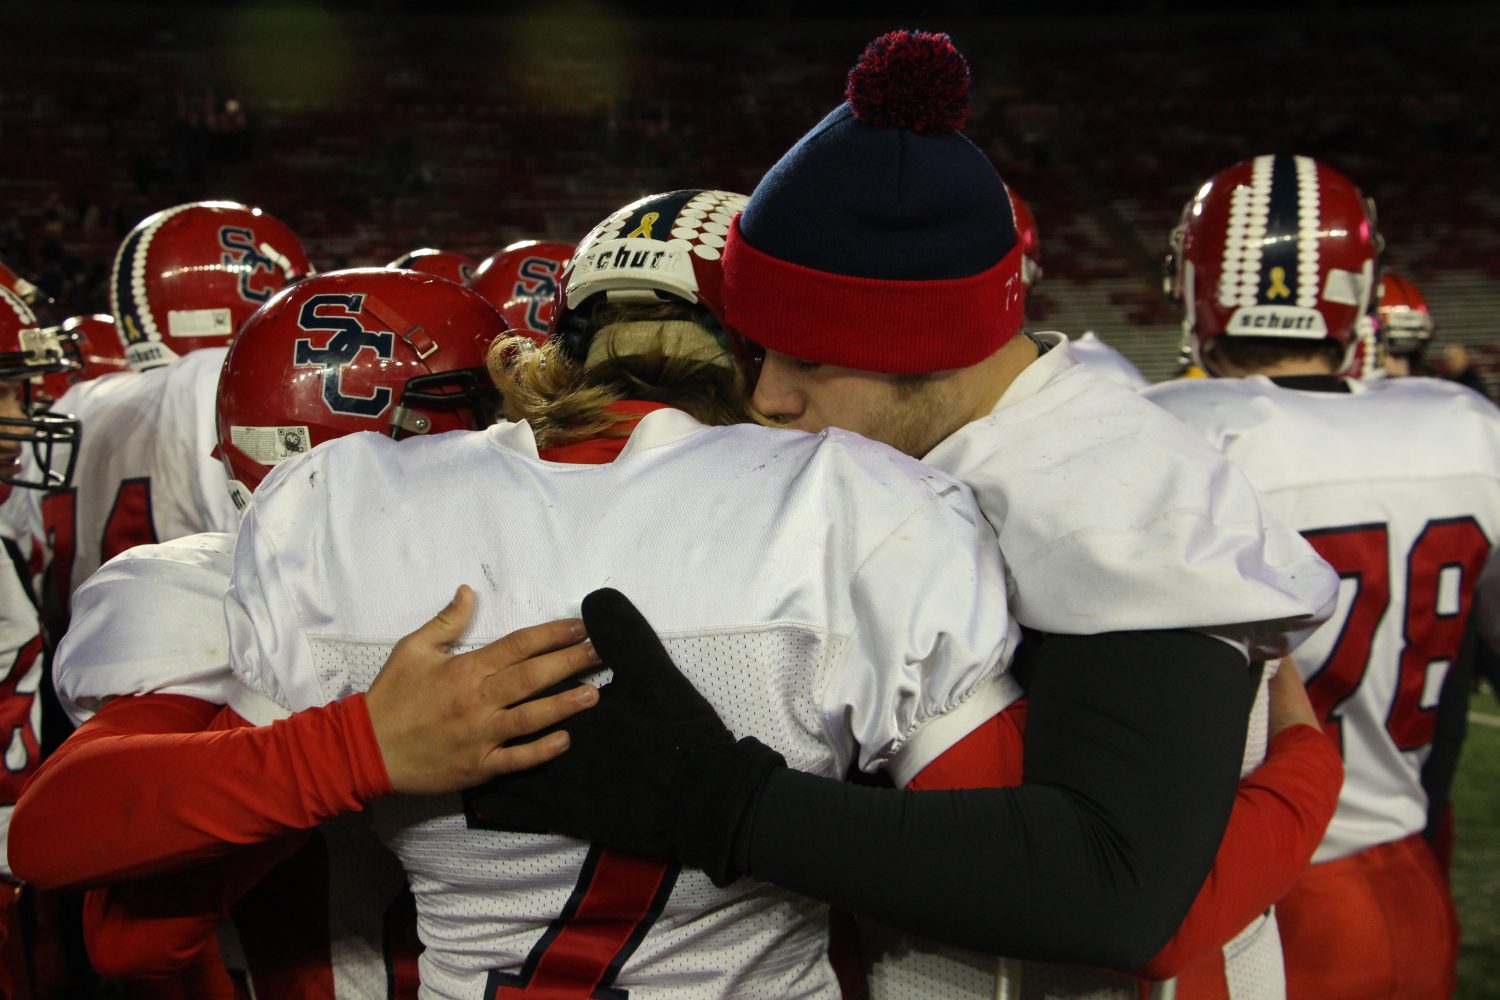 From left, Carson Hildebrandt, Calvin Lenz, and Brett Loveland hug after the Rockets lost to Amherst 42-0 in the WIAA Division 5 State Championship Game at Camp Randall Stadium in Madison, Thursday, Nov. 19, 2015.